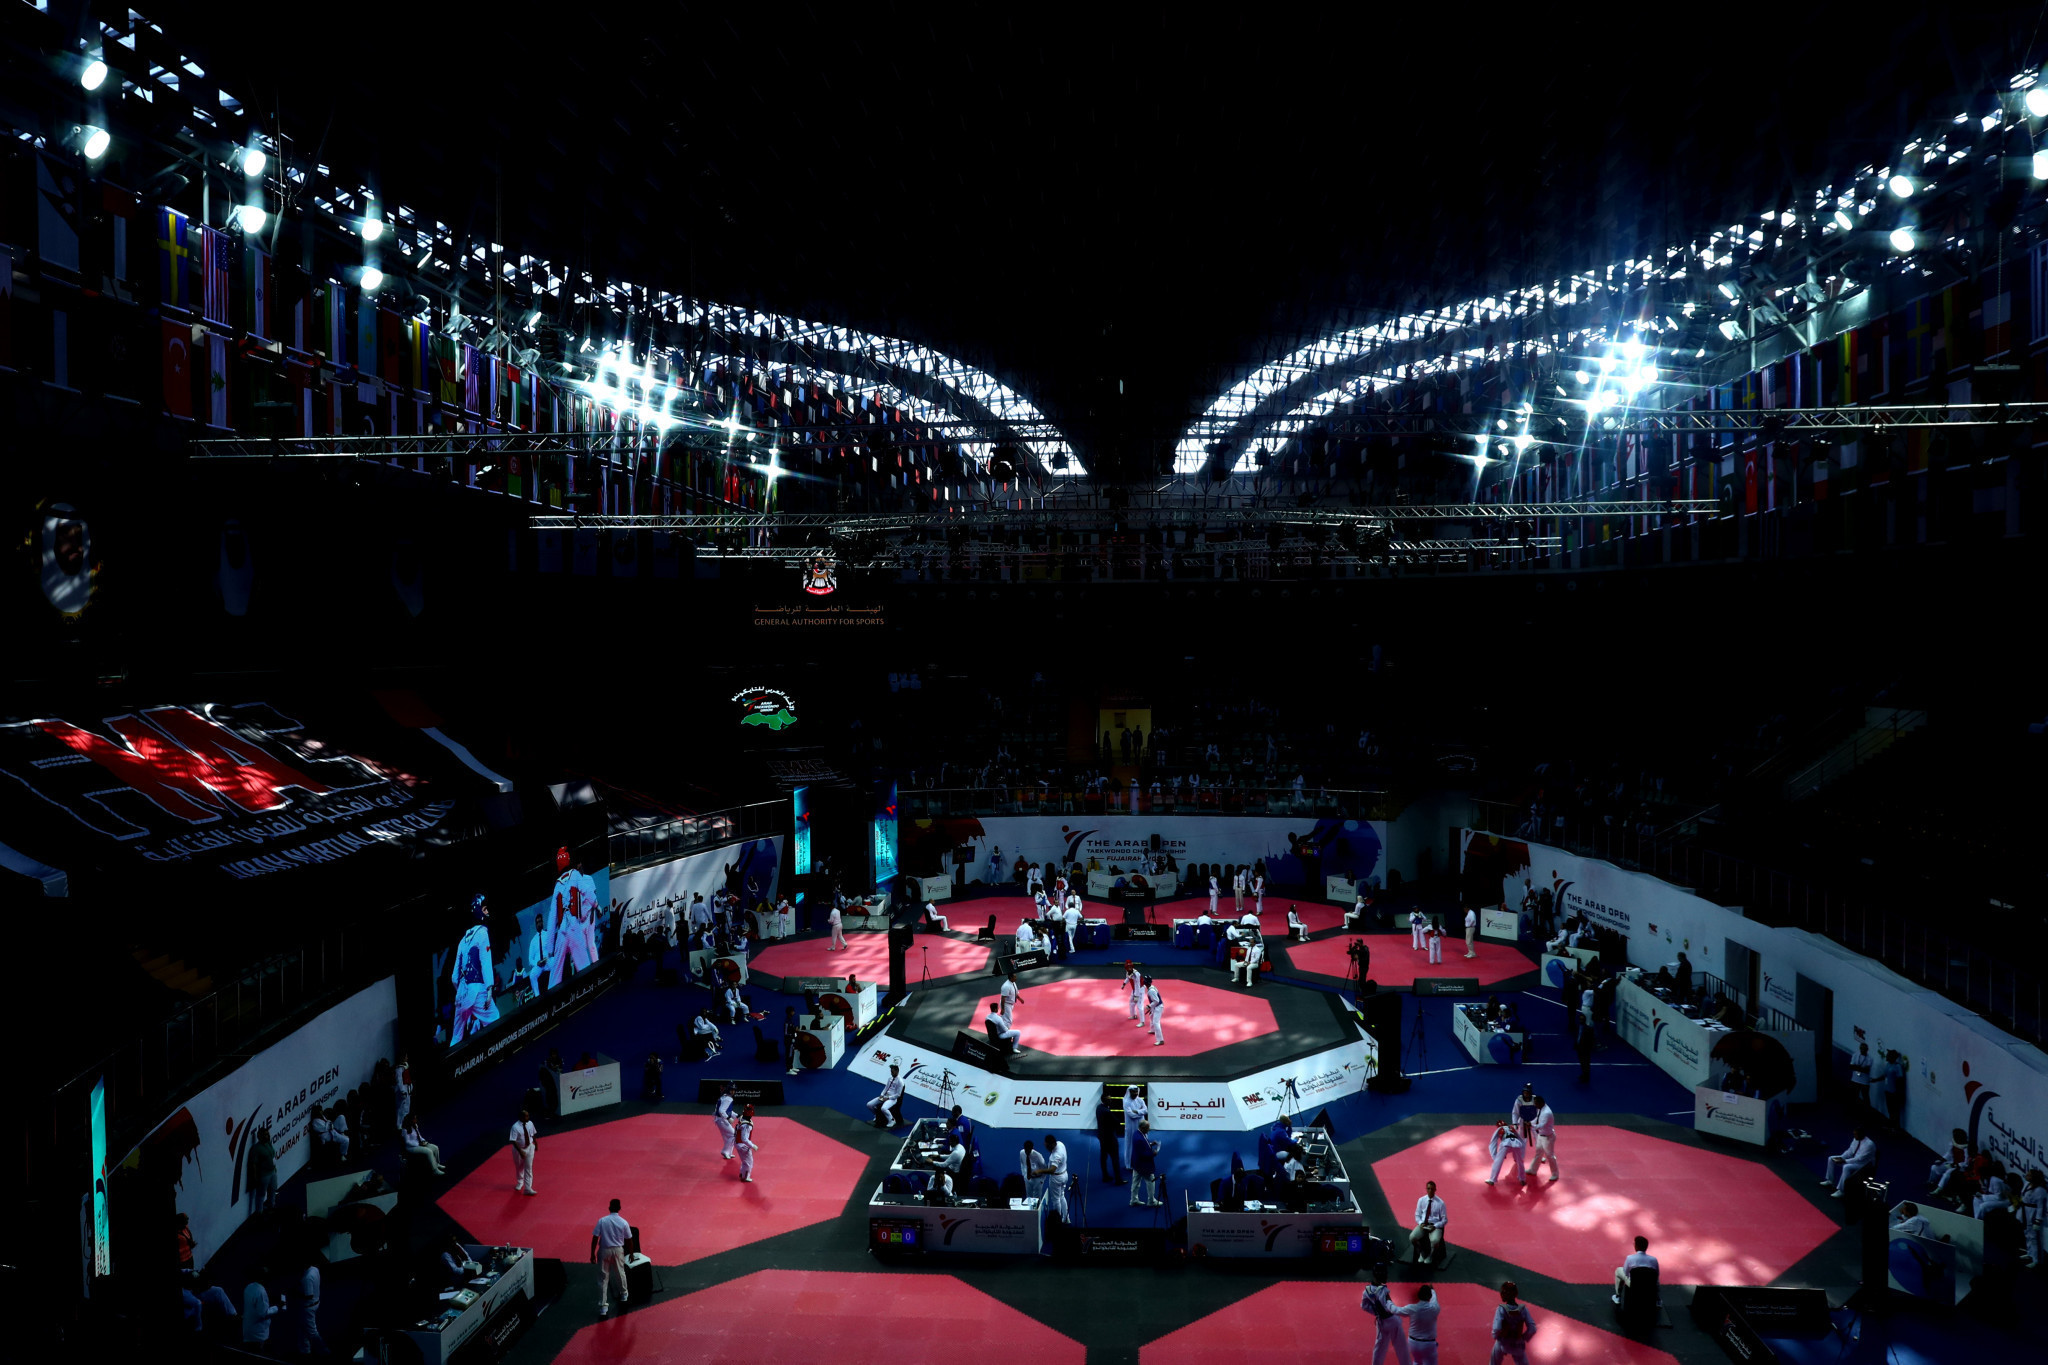 New round robin format set to be launched at opening Karate 1-Premier League event in Fujairah